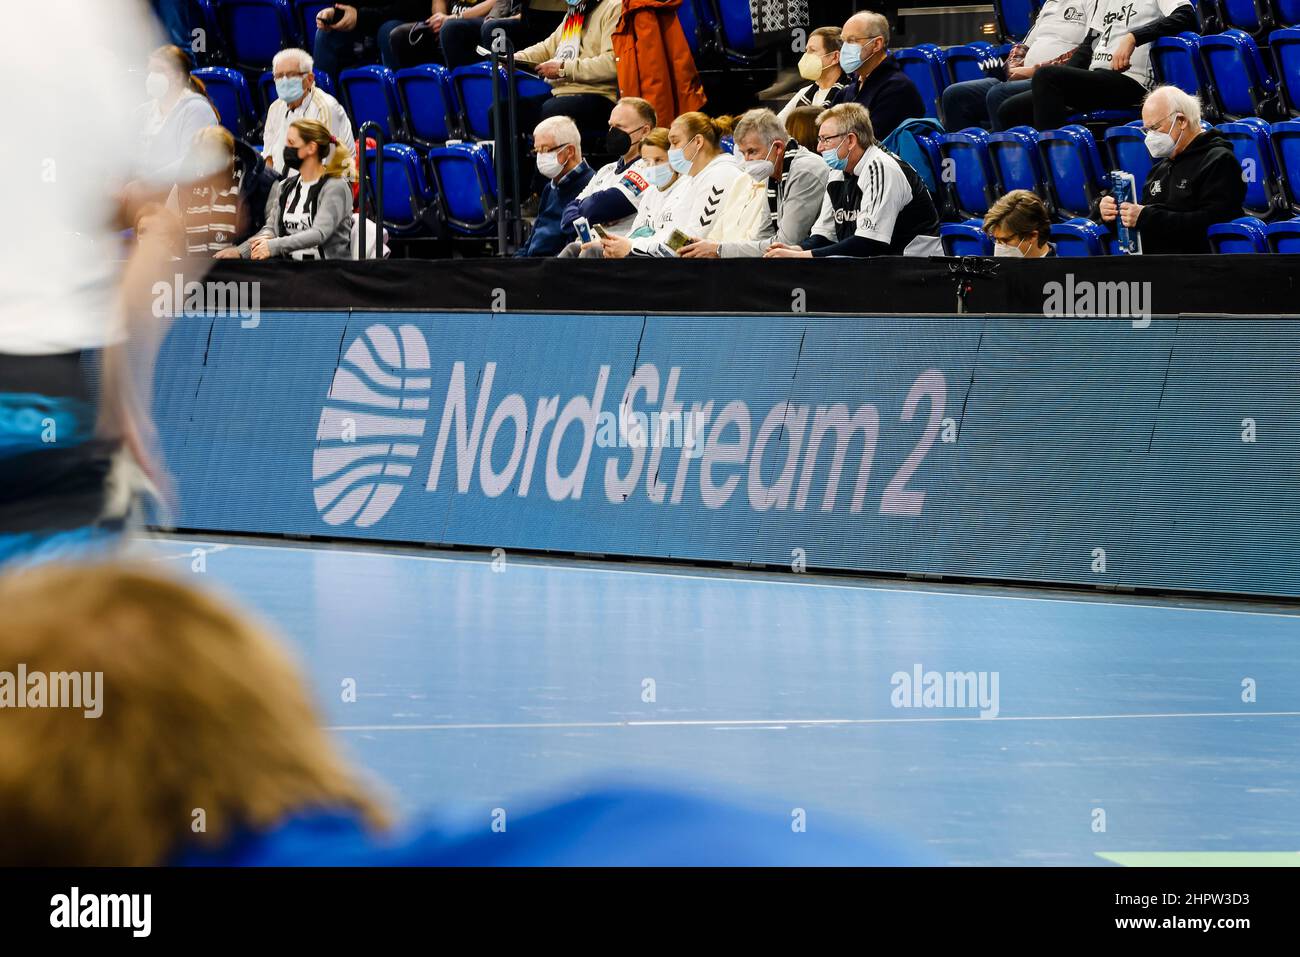 Kiel, Germany. 23rd Feb, 2022. Handball: Champions League, THW Kiel -  Montpellier HB, Group Stage, Group A, Matchday 12, Wunderino Arena. The  "Nord Stream 2" logo is displayed on a digital advertising